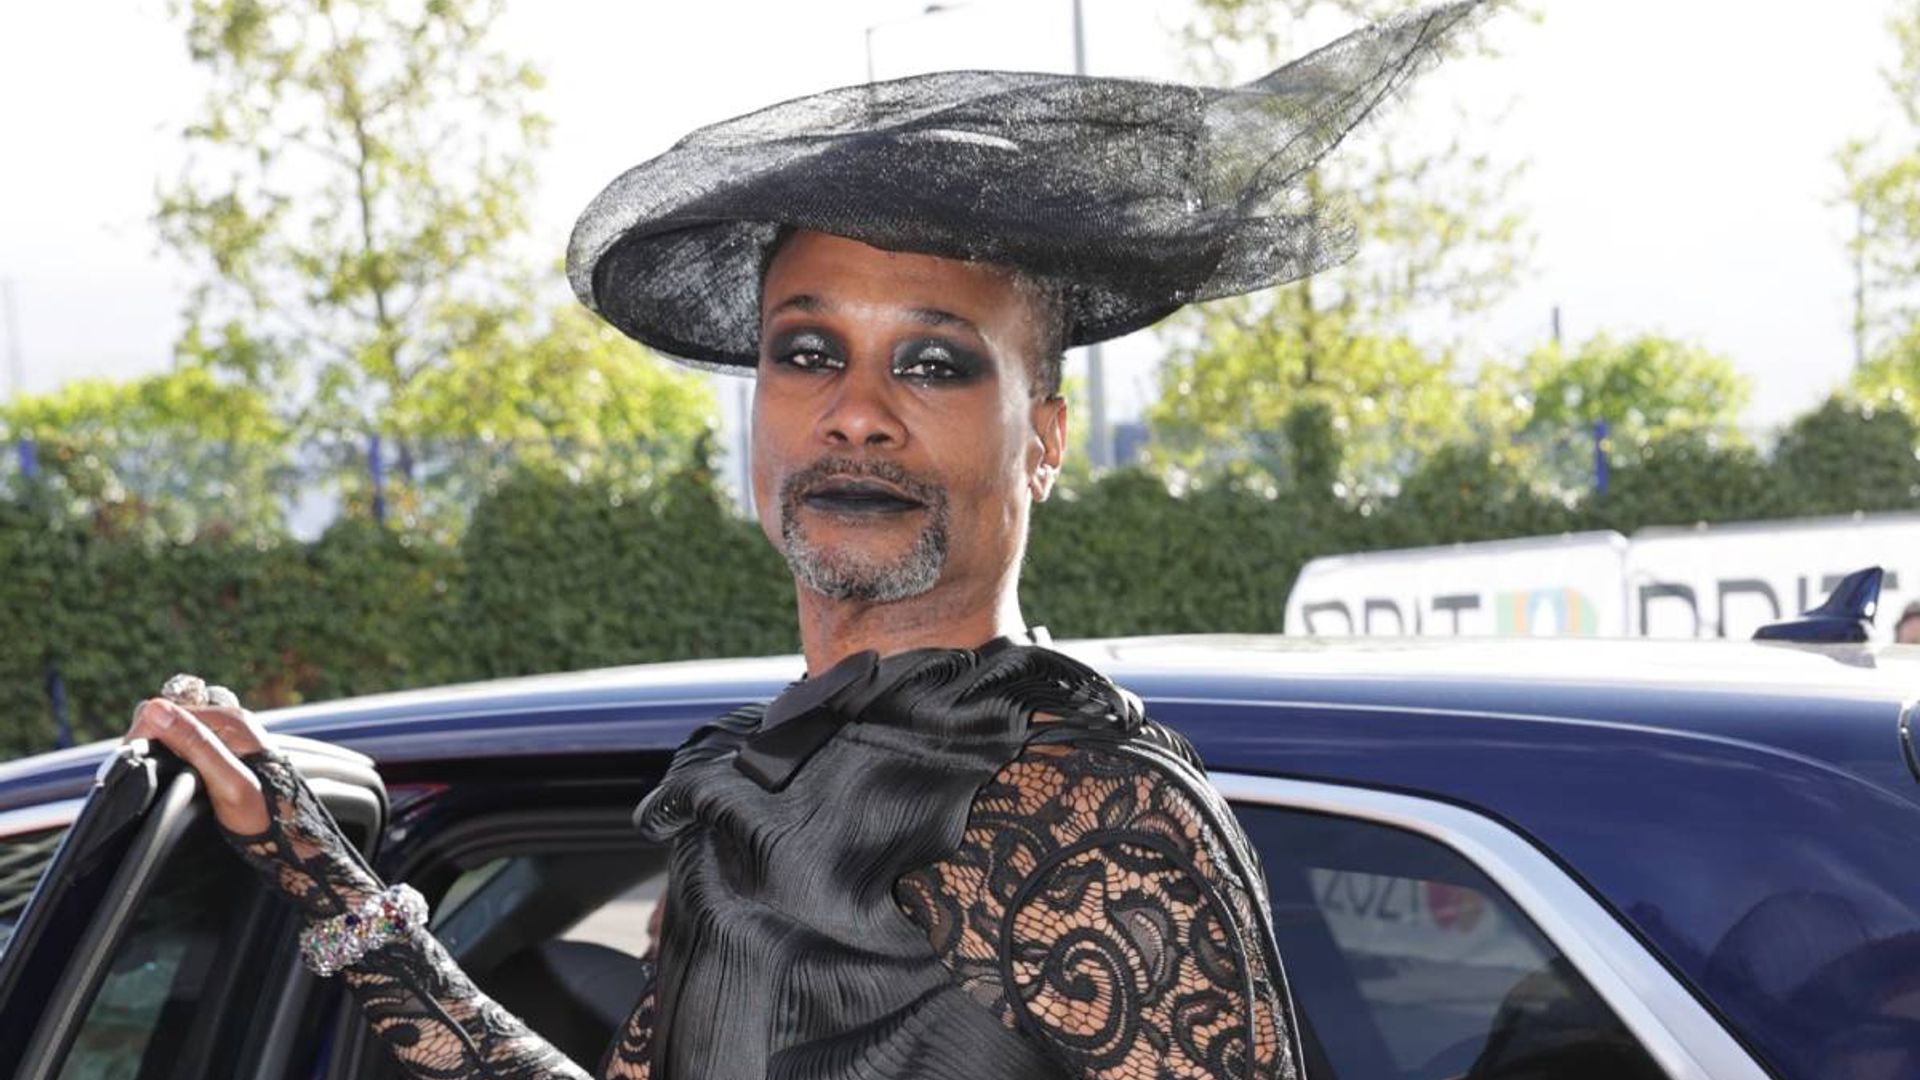 Billy Porter hits the Brit Awards in a showstopping look you need to see